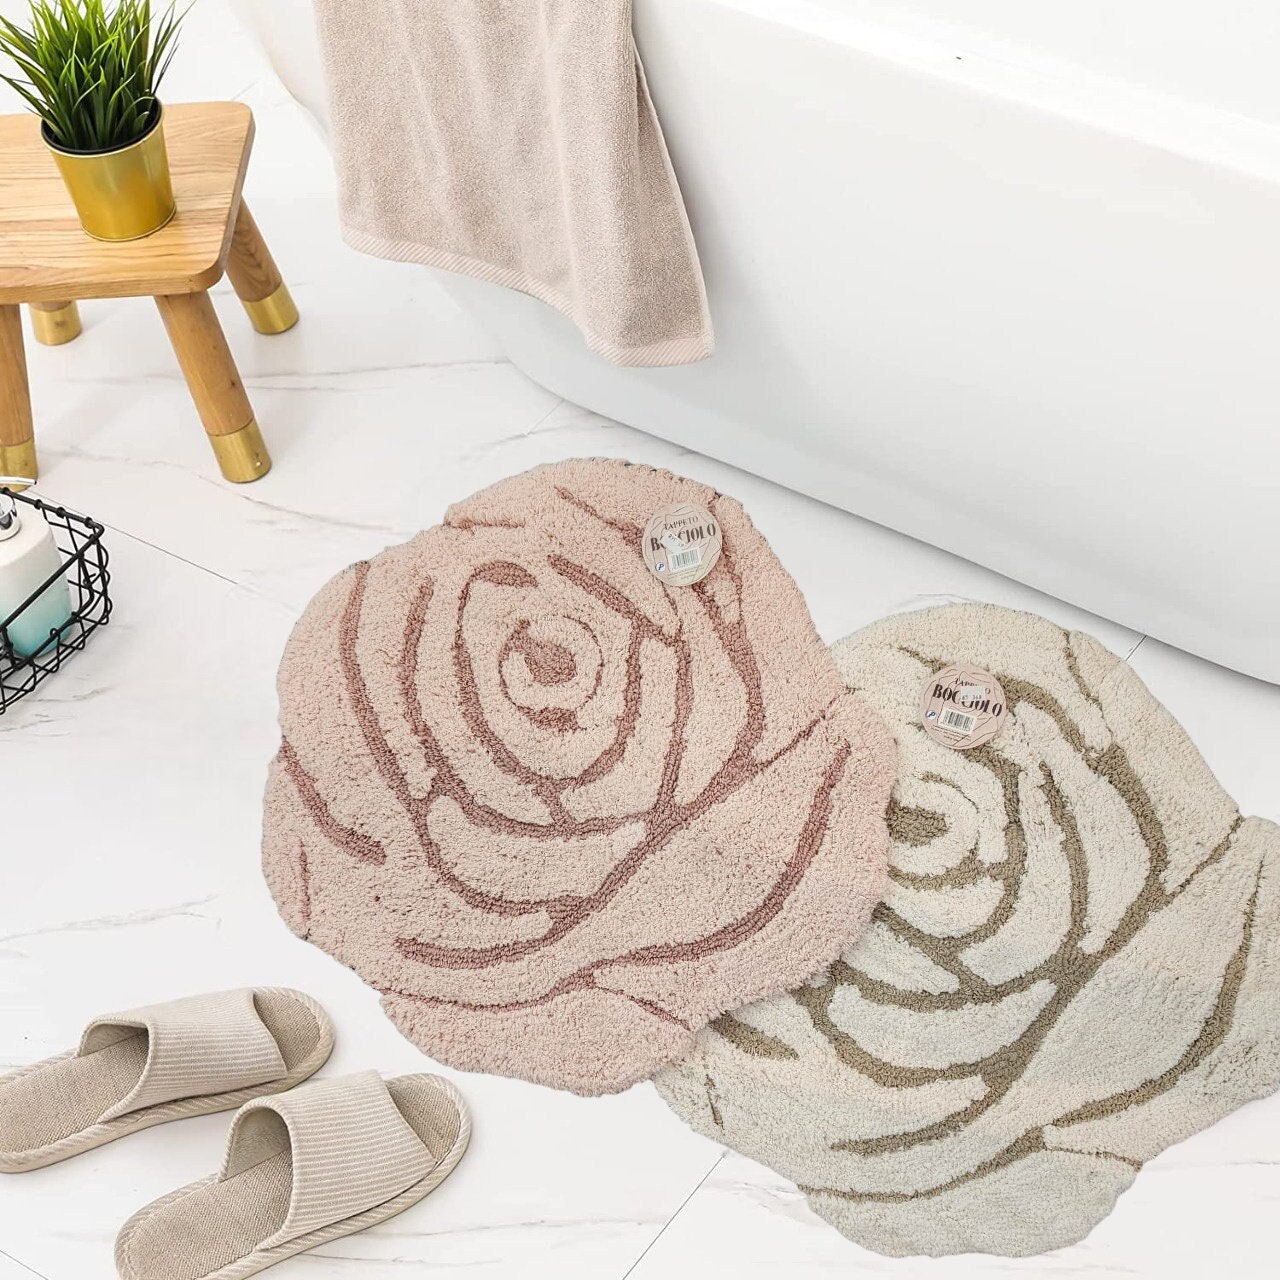  Rstick Red Roses Bathroom Rugs Non Slip Washable Seamless  Flowers Bath Mat Small Rubber Backed Floor Mat 17x24 : Home & Kitchen